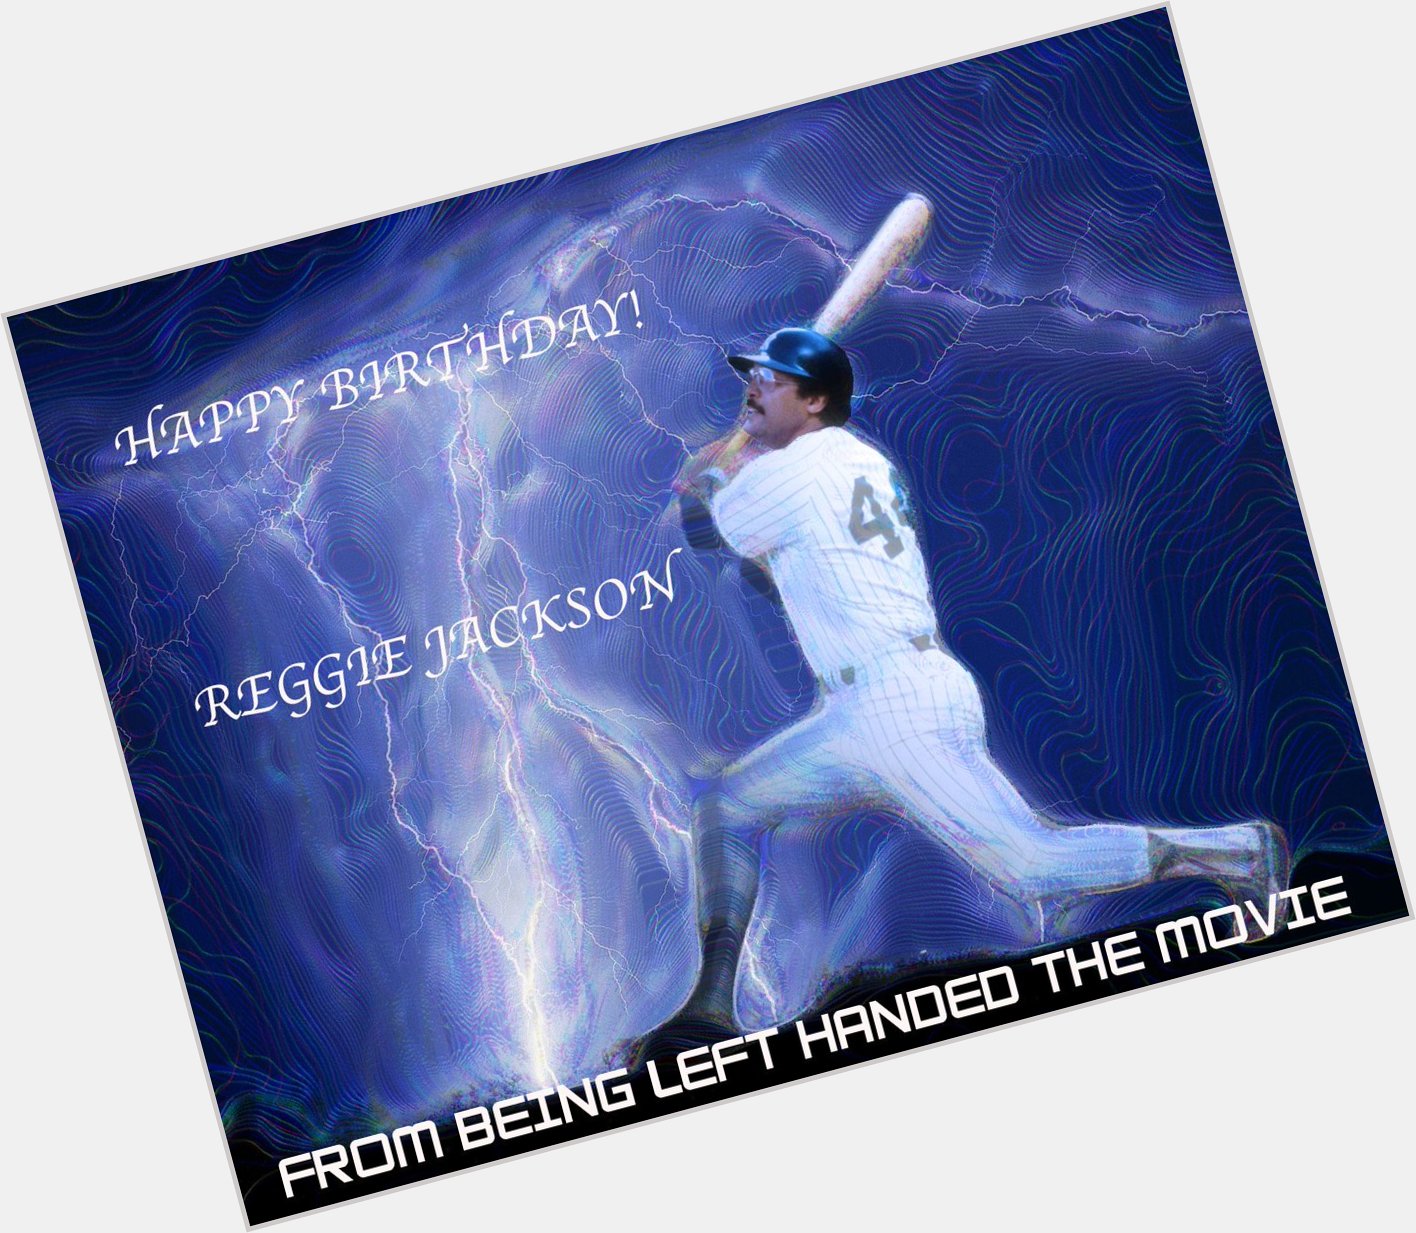 Hello Friends,
Here\s a Happy Birthday graphic I did, for legendary left-handed baseball great Reggie Jackson. 